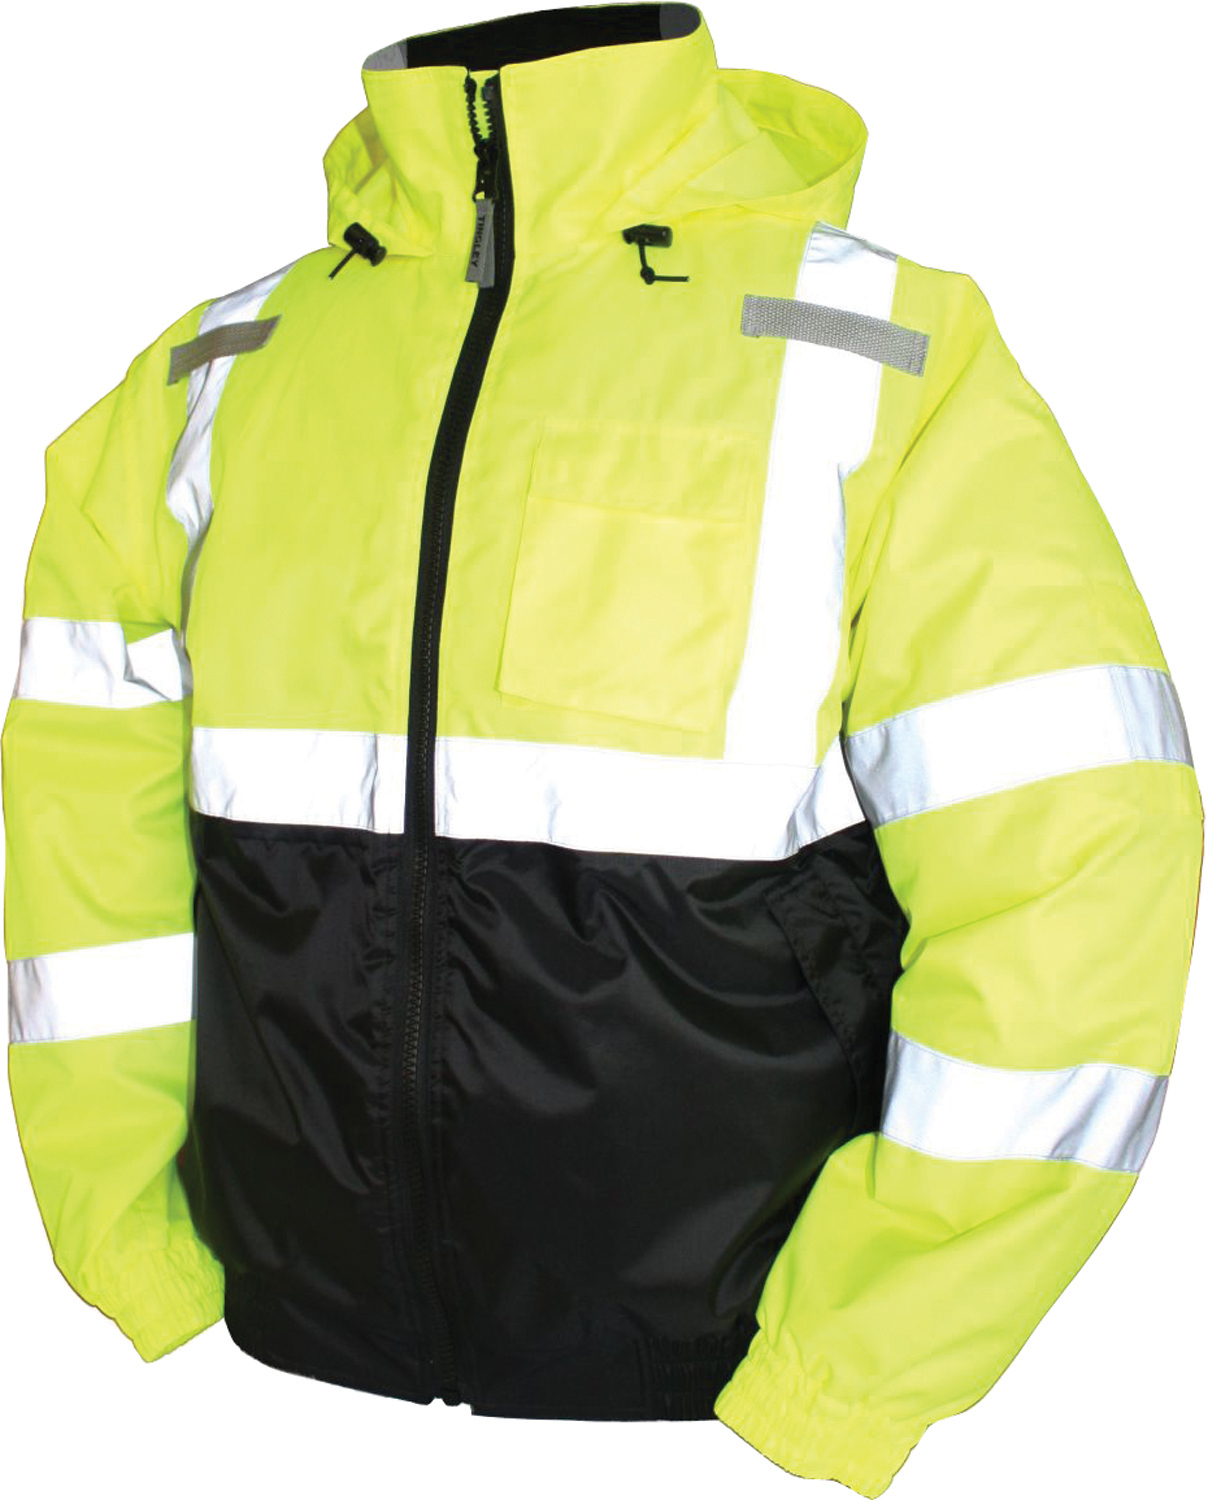 Tingley Rubber Corp.-Bomber Ii High Visibility Waterproof Jacket- Lime Green 2 Extra Large - image 4 of 4